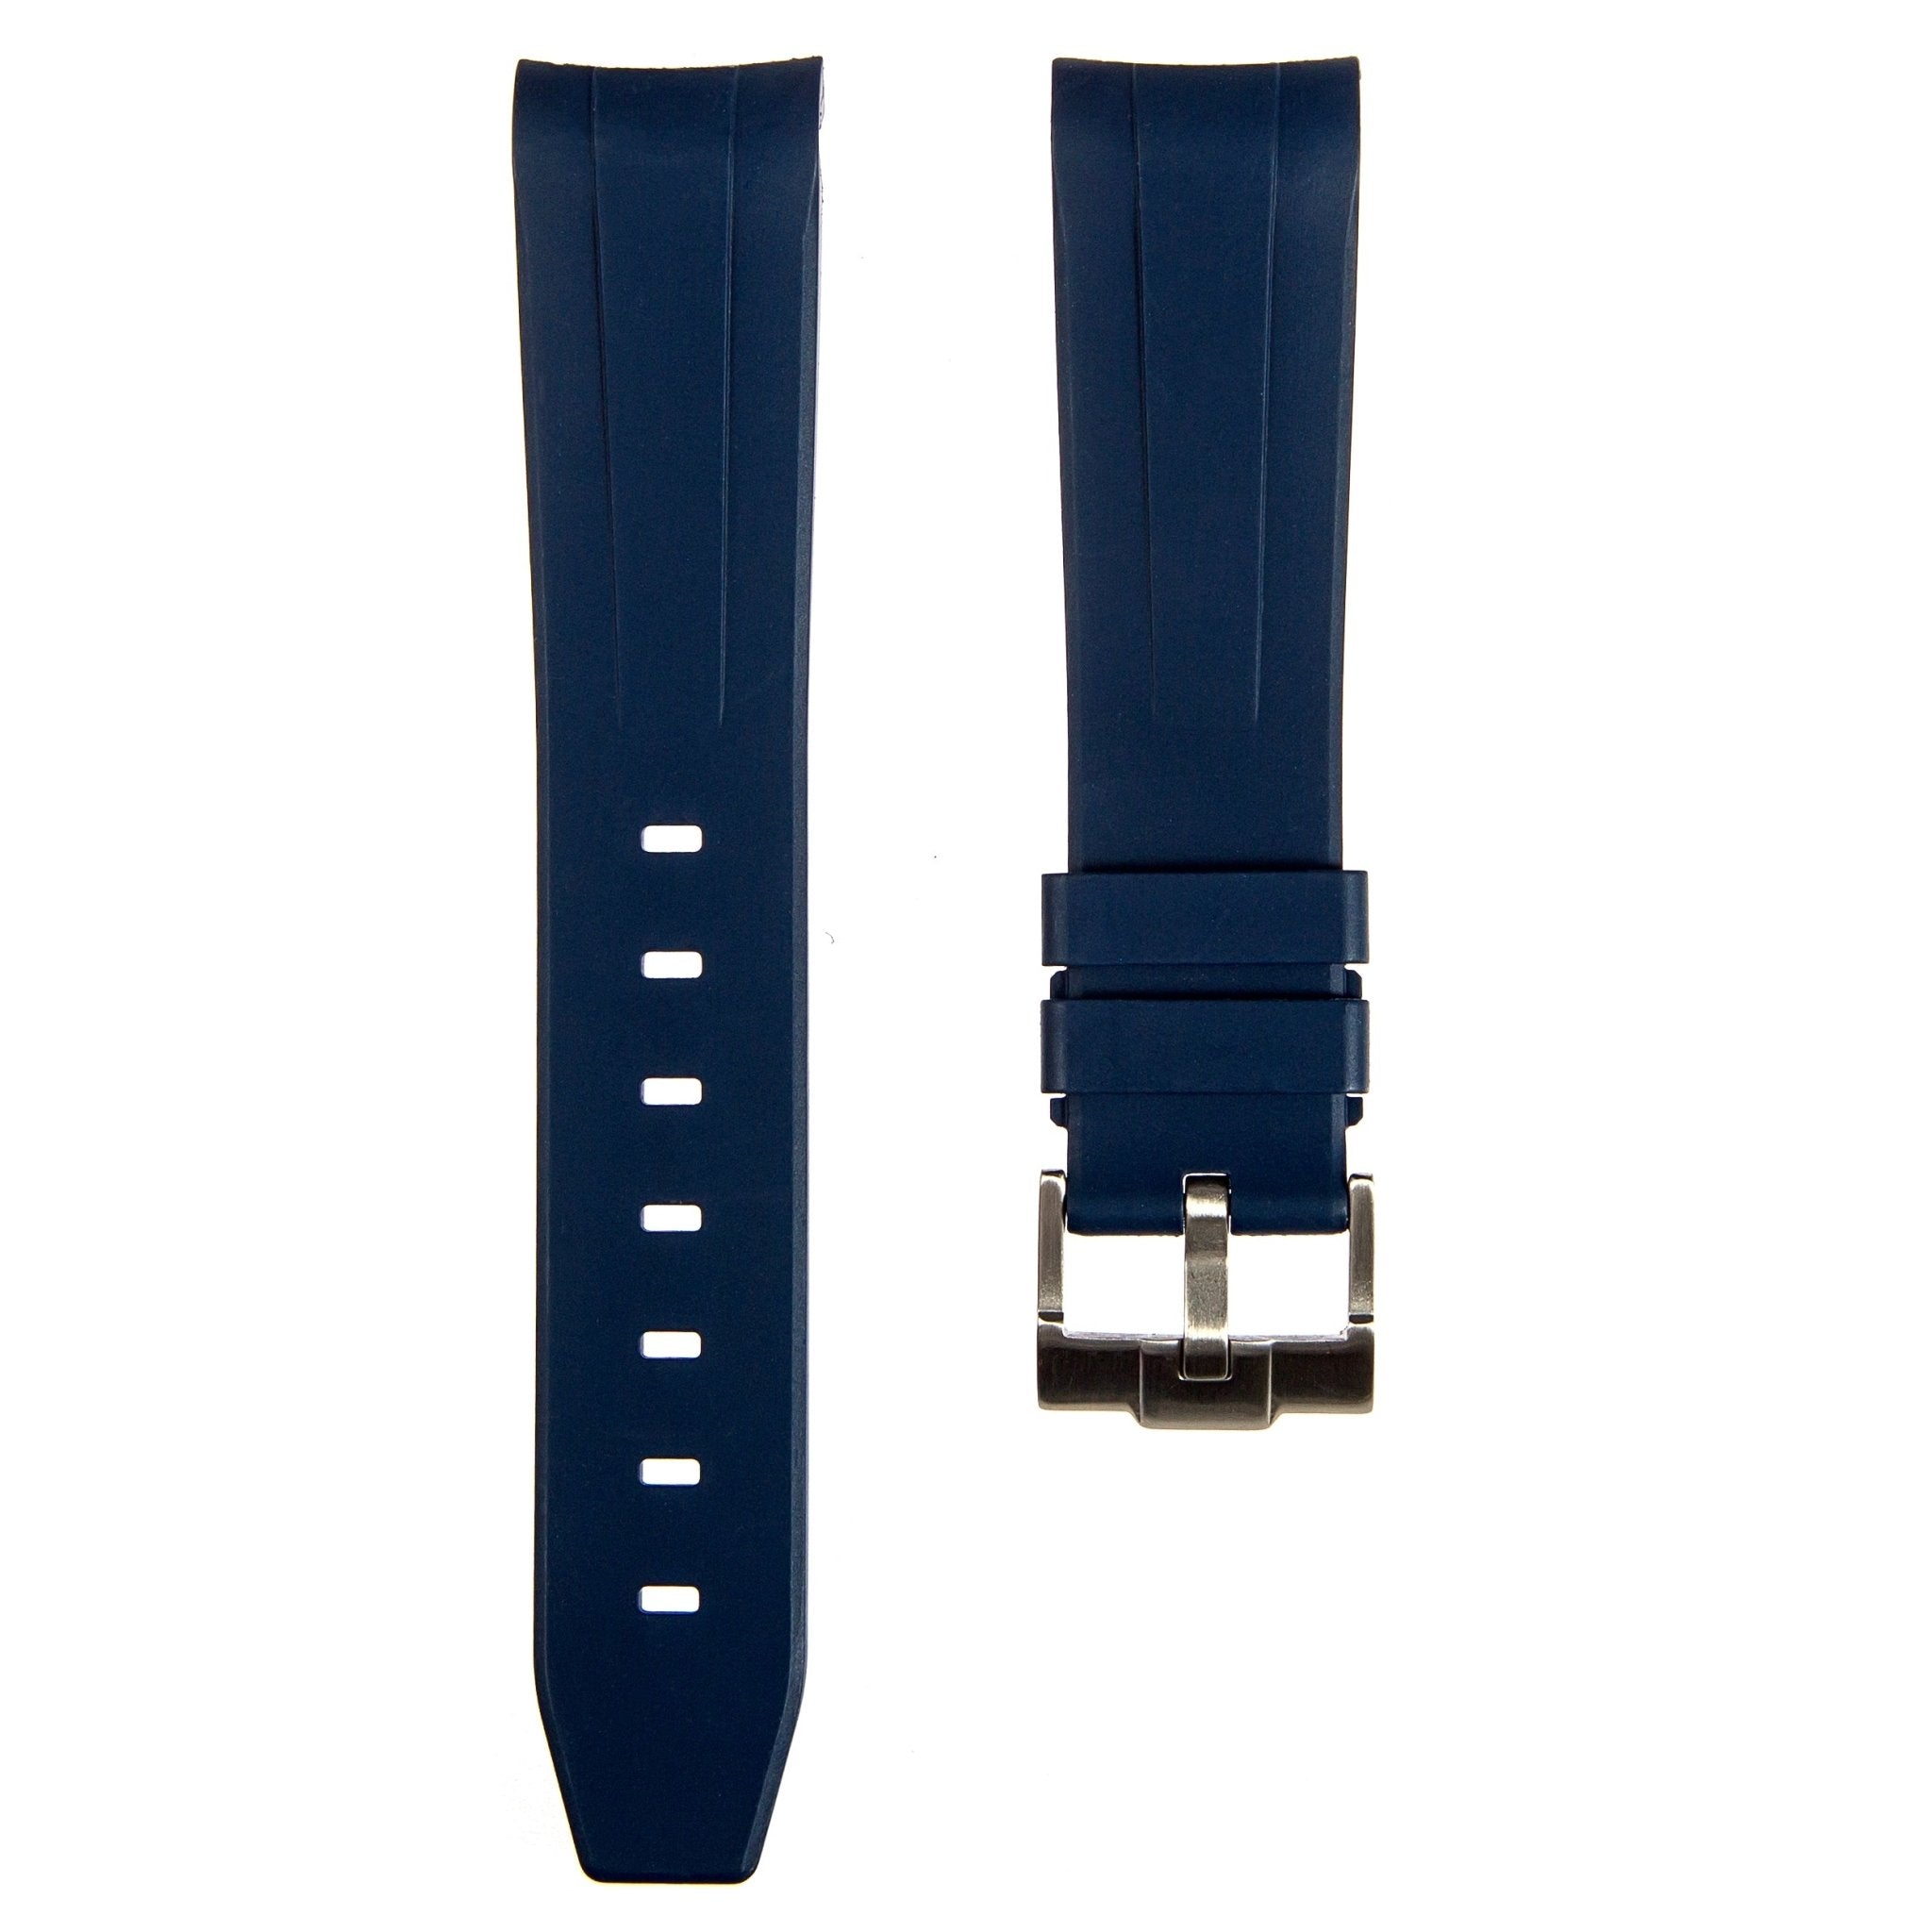 Forge Curved End FKM Rubber Strap – Compatible with Omega Moonwatch – Navy (2421) -Strapseeker